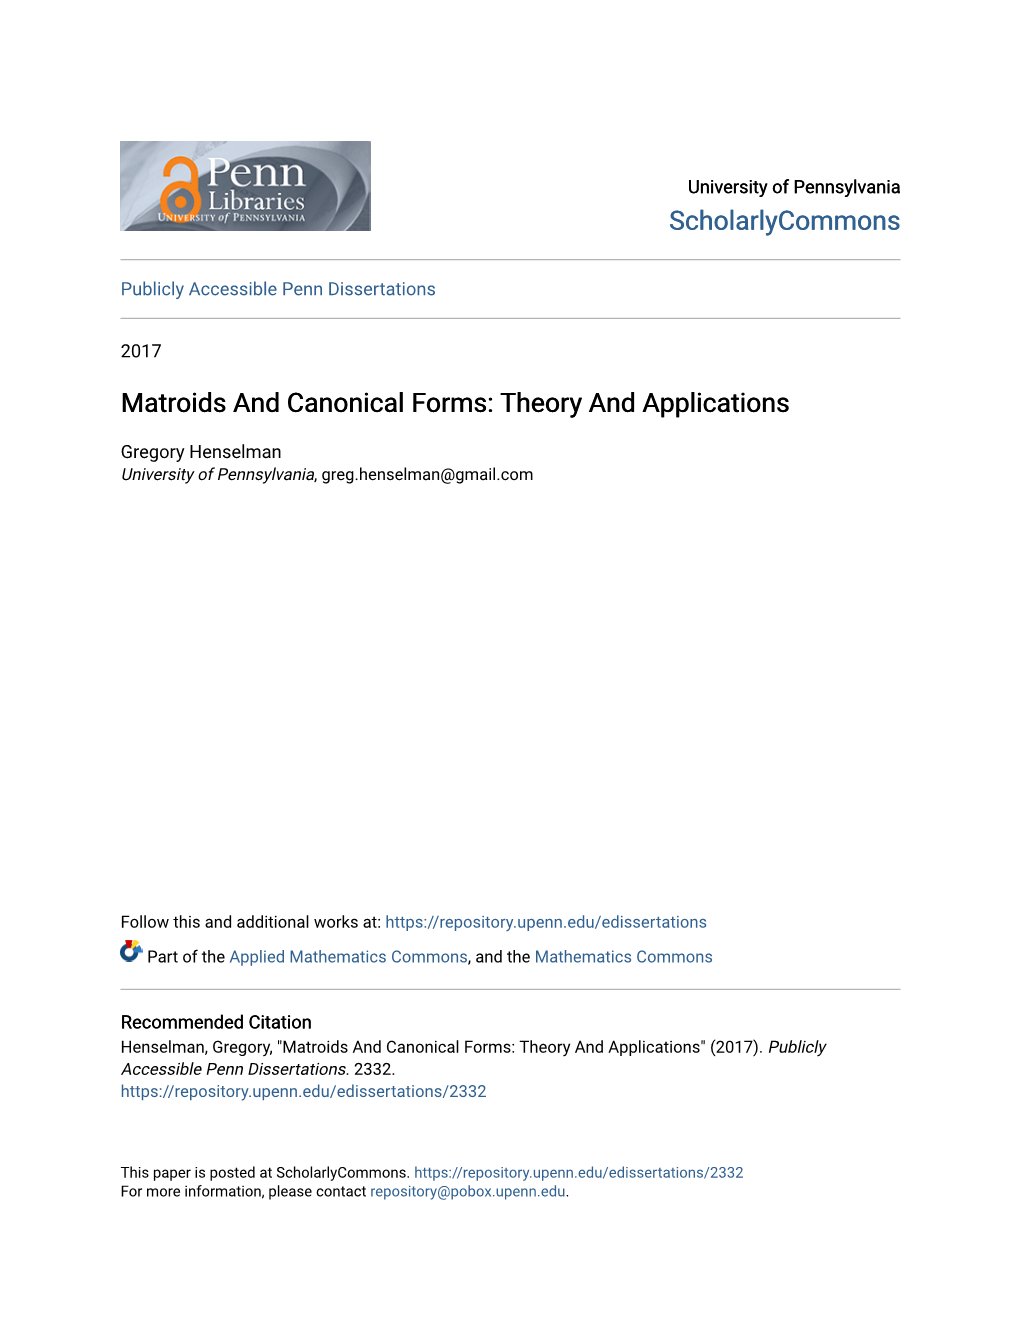 Matroids and Canonical Forms: Theory and Applications